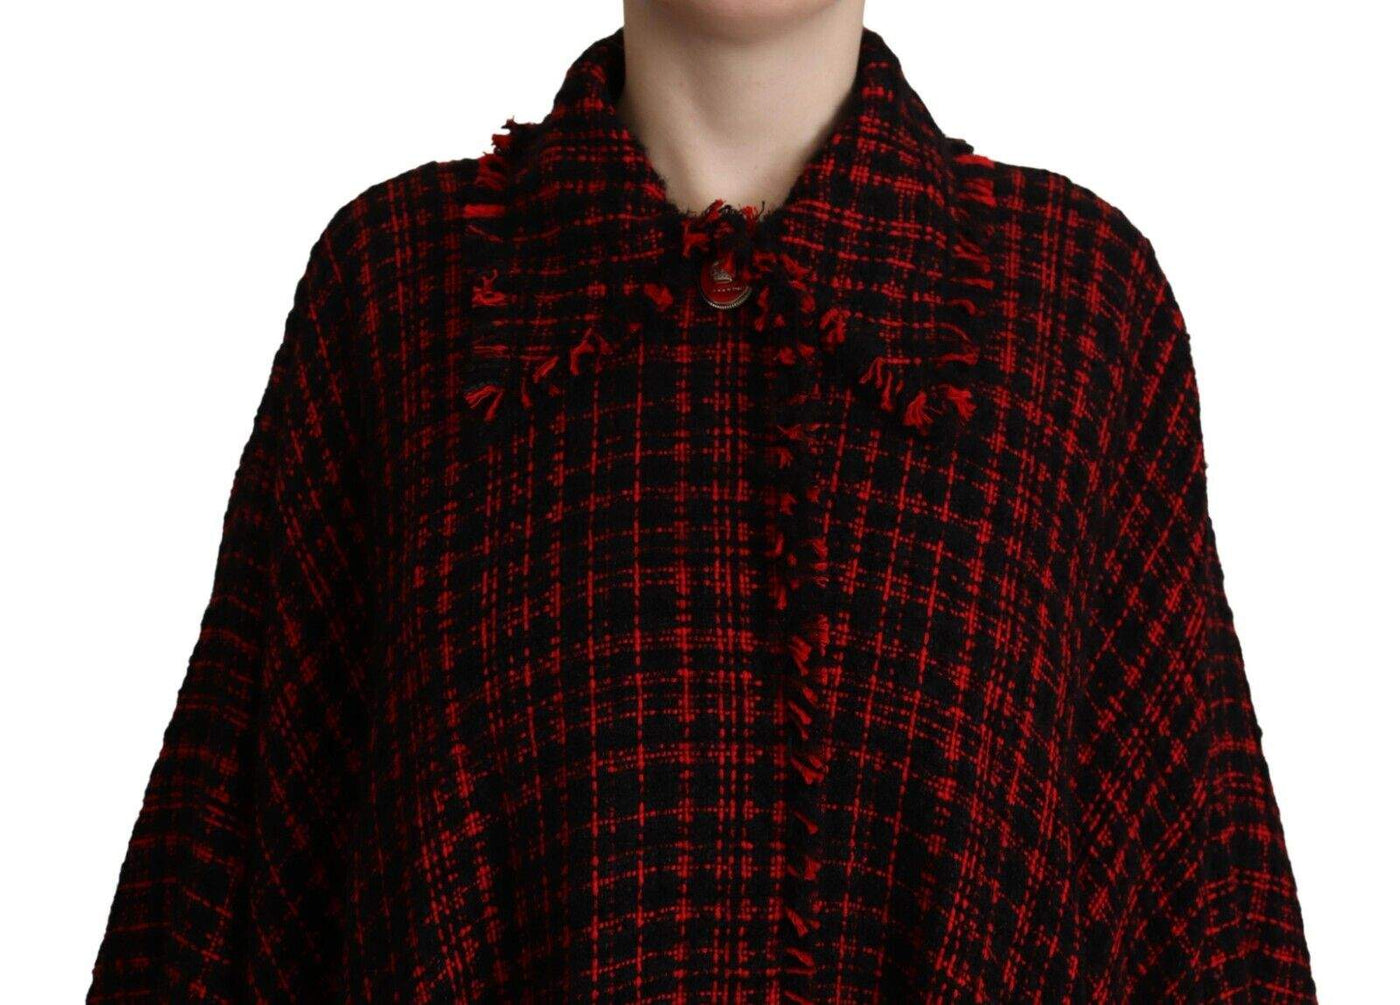 Dolce & Gabbana Black Red Cotton Checkered Over Coat Jacket Black and Red, Dolce & Gabbana, feed-1, IT40|S, Jackets & Coats - Women - Clothing at SEYMAYKA